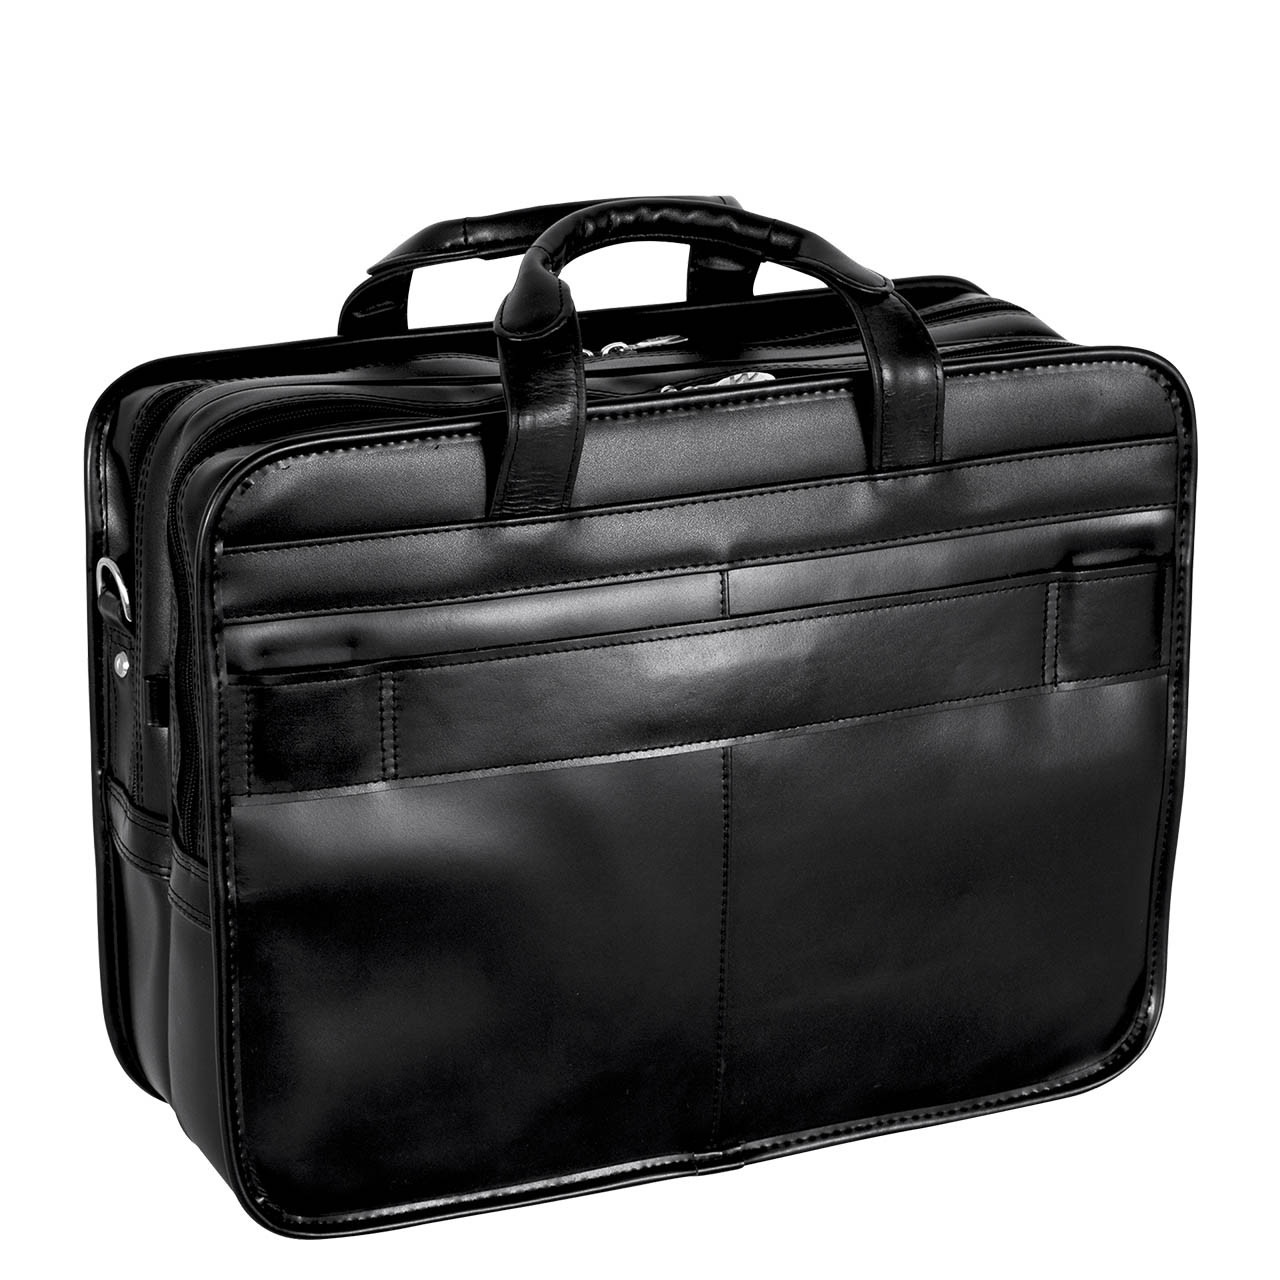 Franklin Covey Black Leather Briefcase